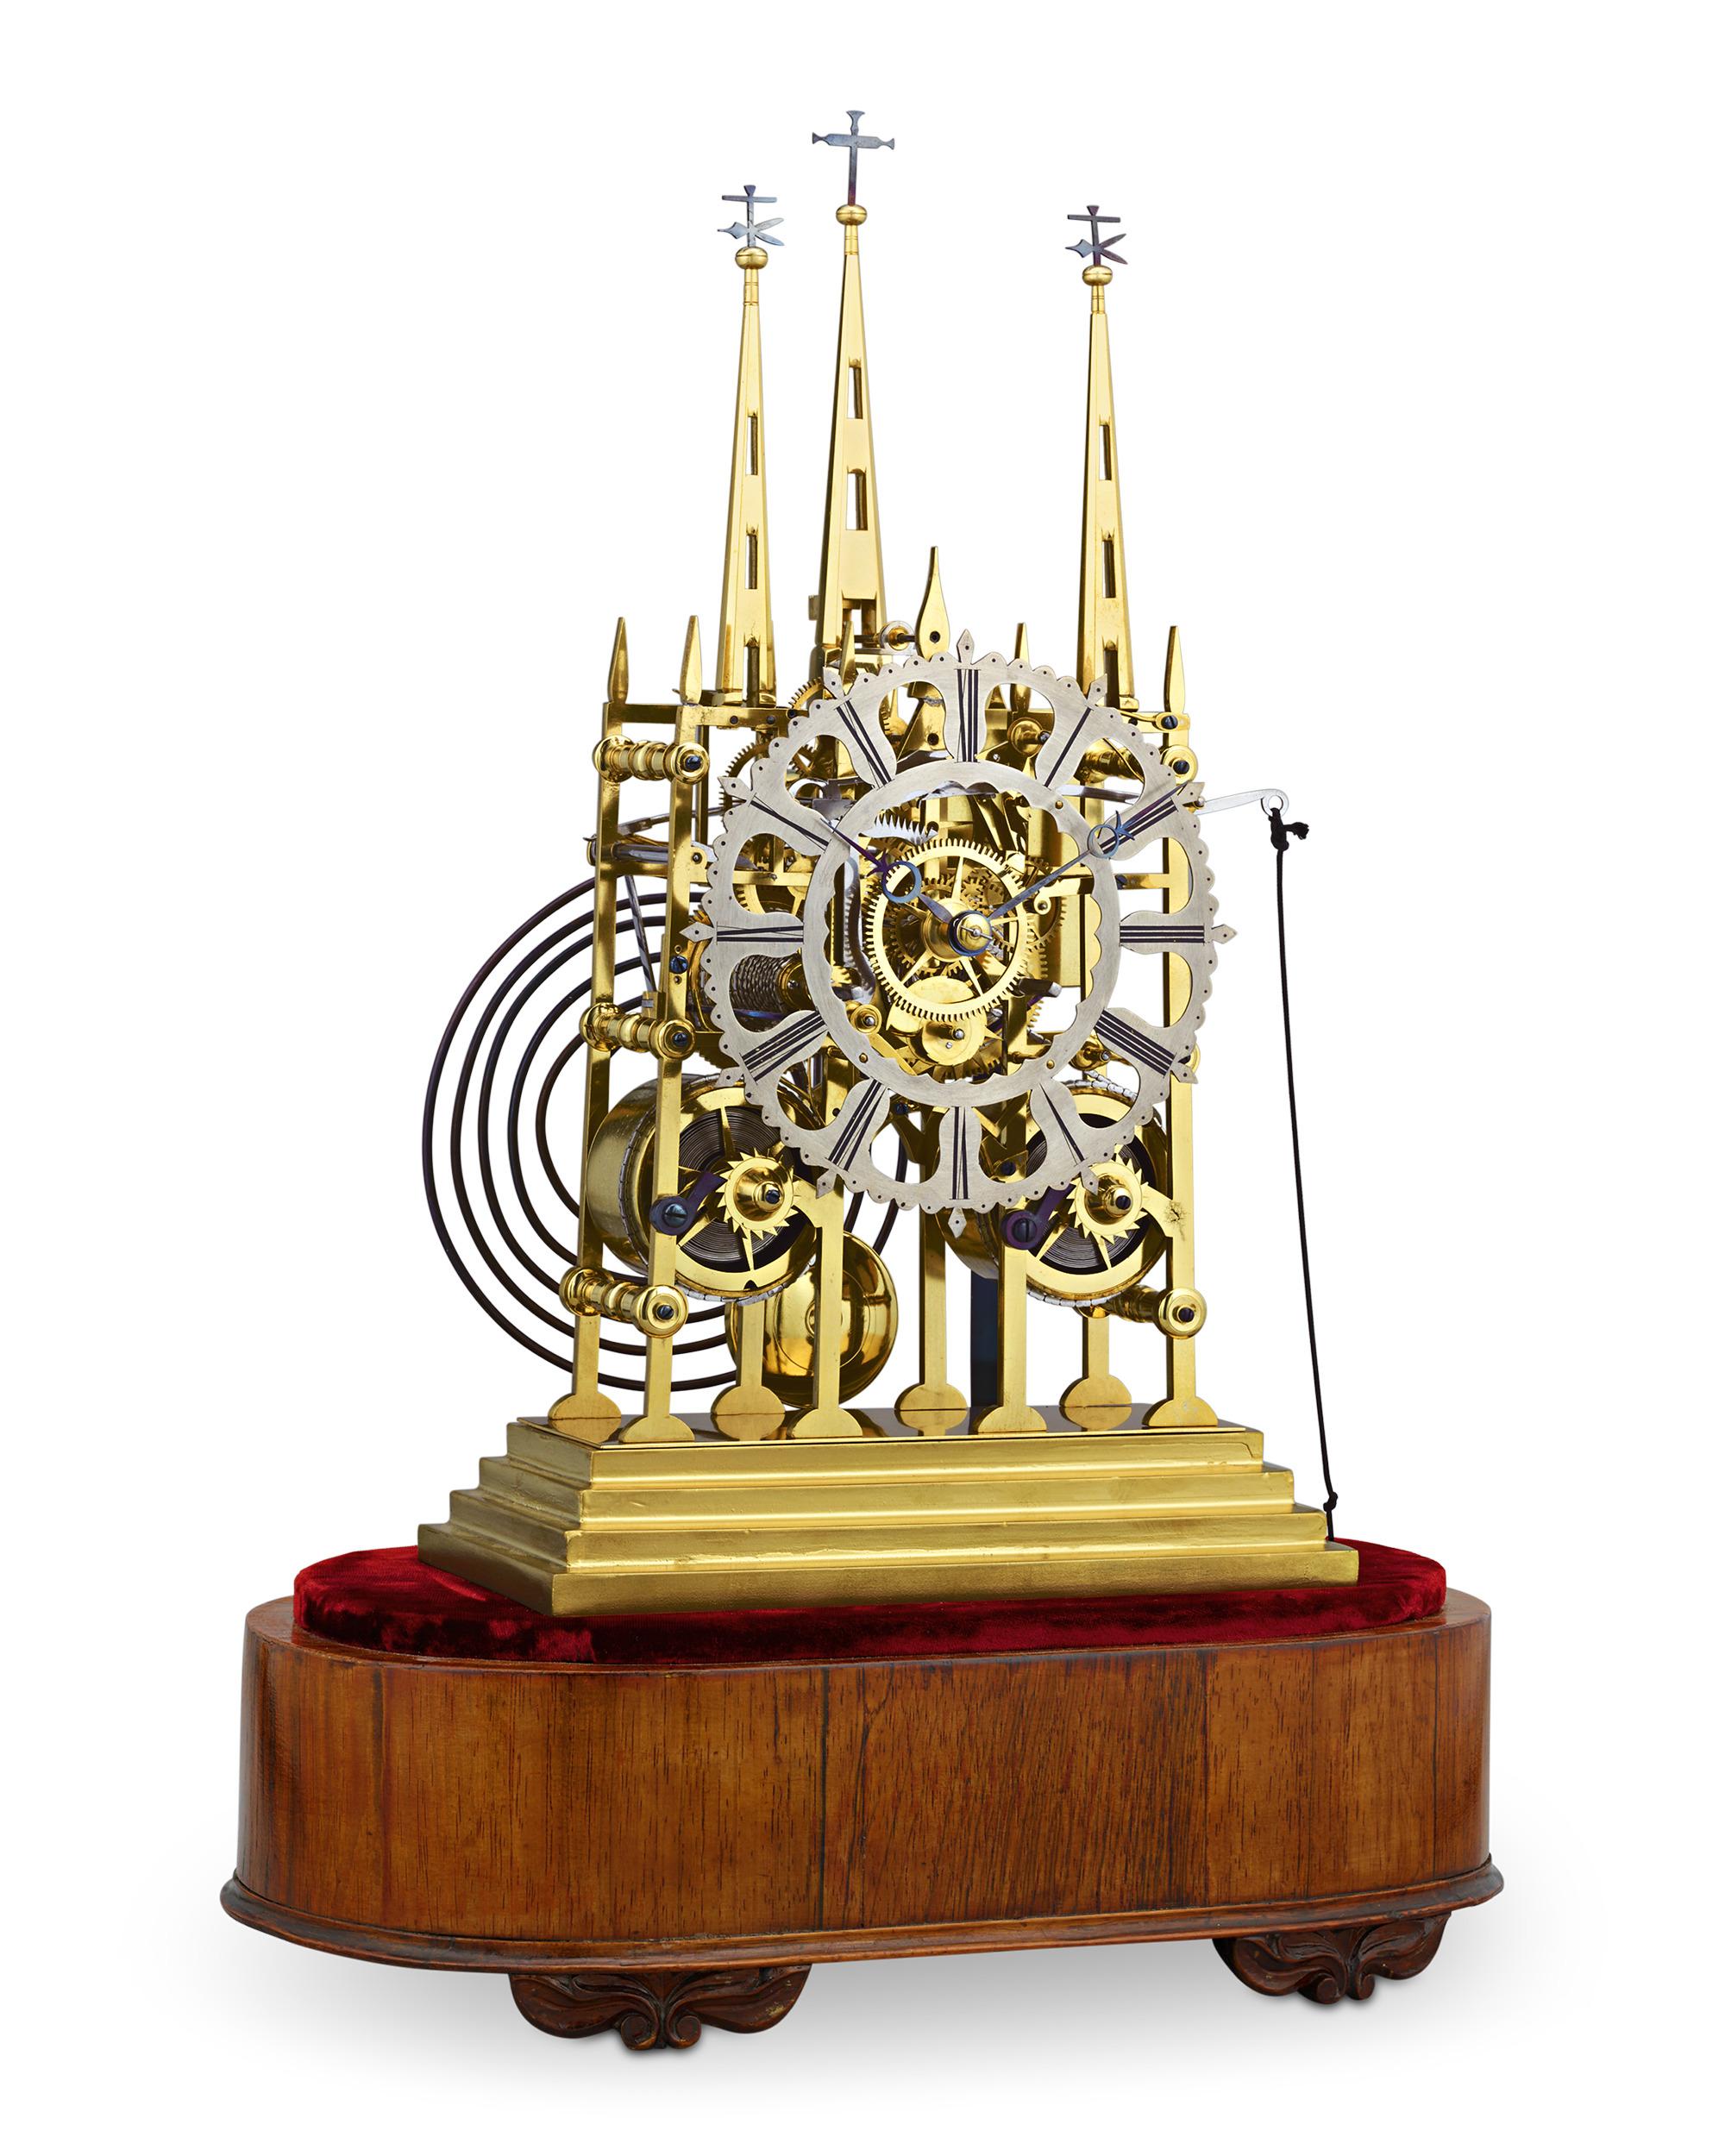 This remarkable English Litchfield Cathedral skeleton clock, crafted by Evans of Handsworth, captures the essence of the famed Lichfield Cathedral with its iconic three-spire top and stunning Gothic architecture. This extraordinary timepiece